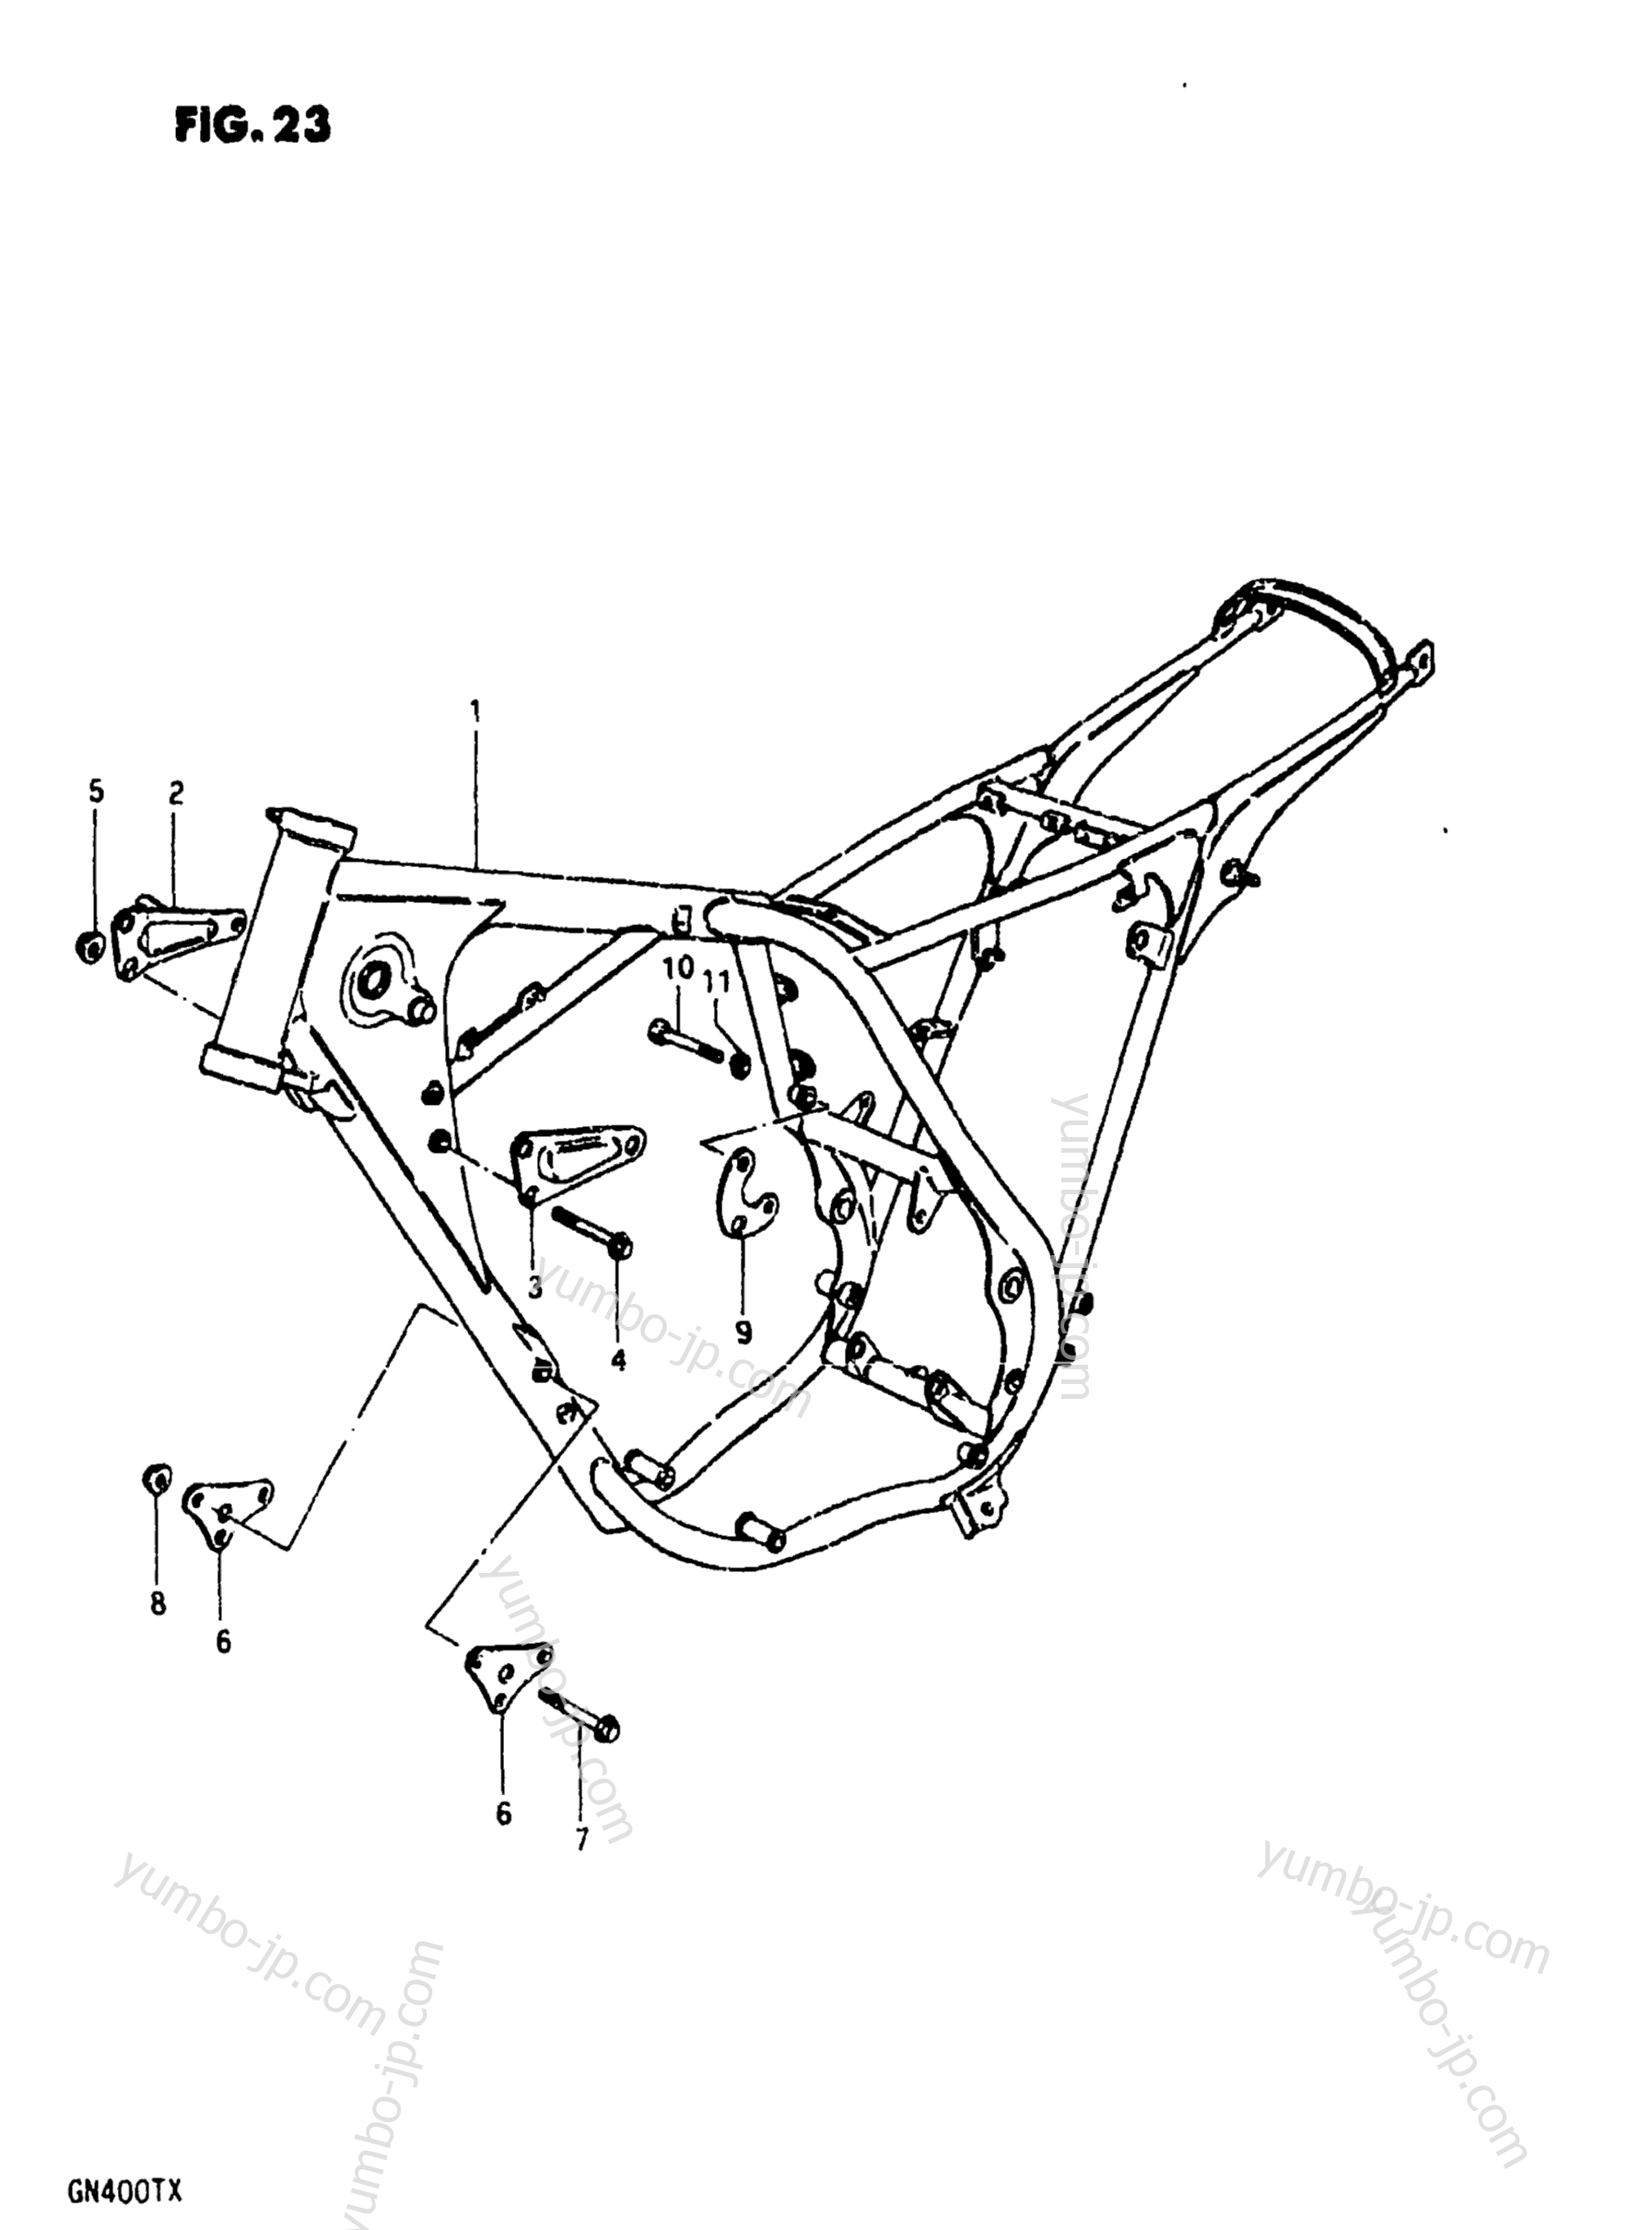 FRAME for motorcycles SUZUKI GN400XT 1980 year